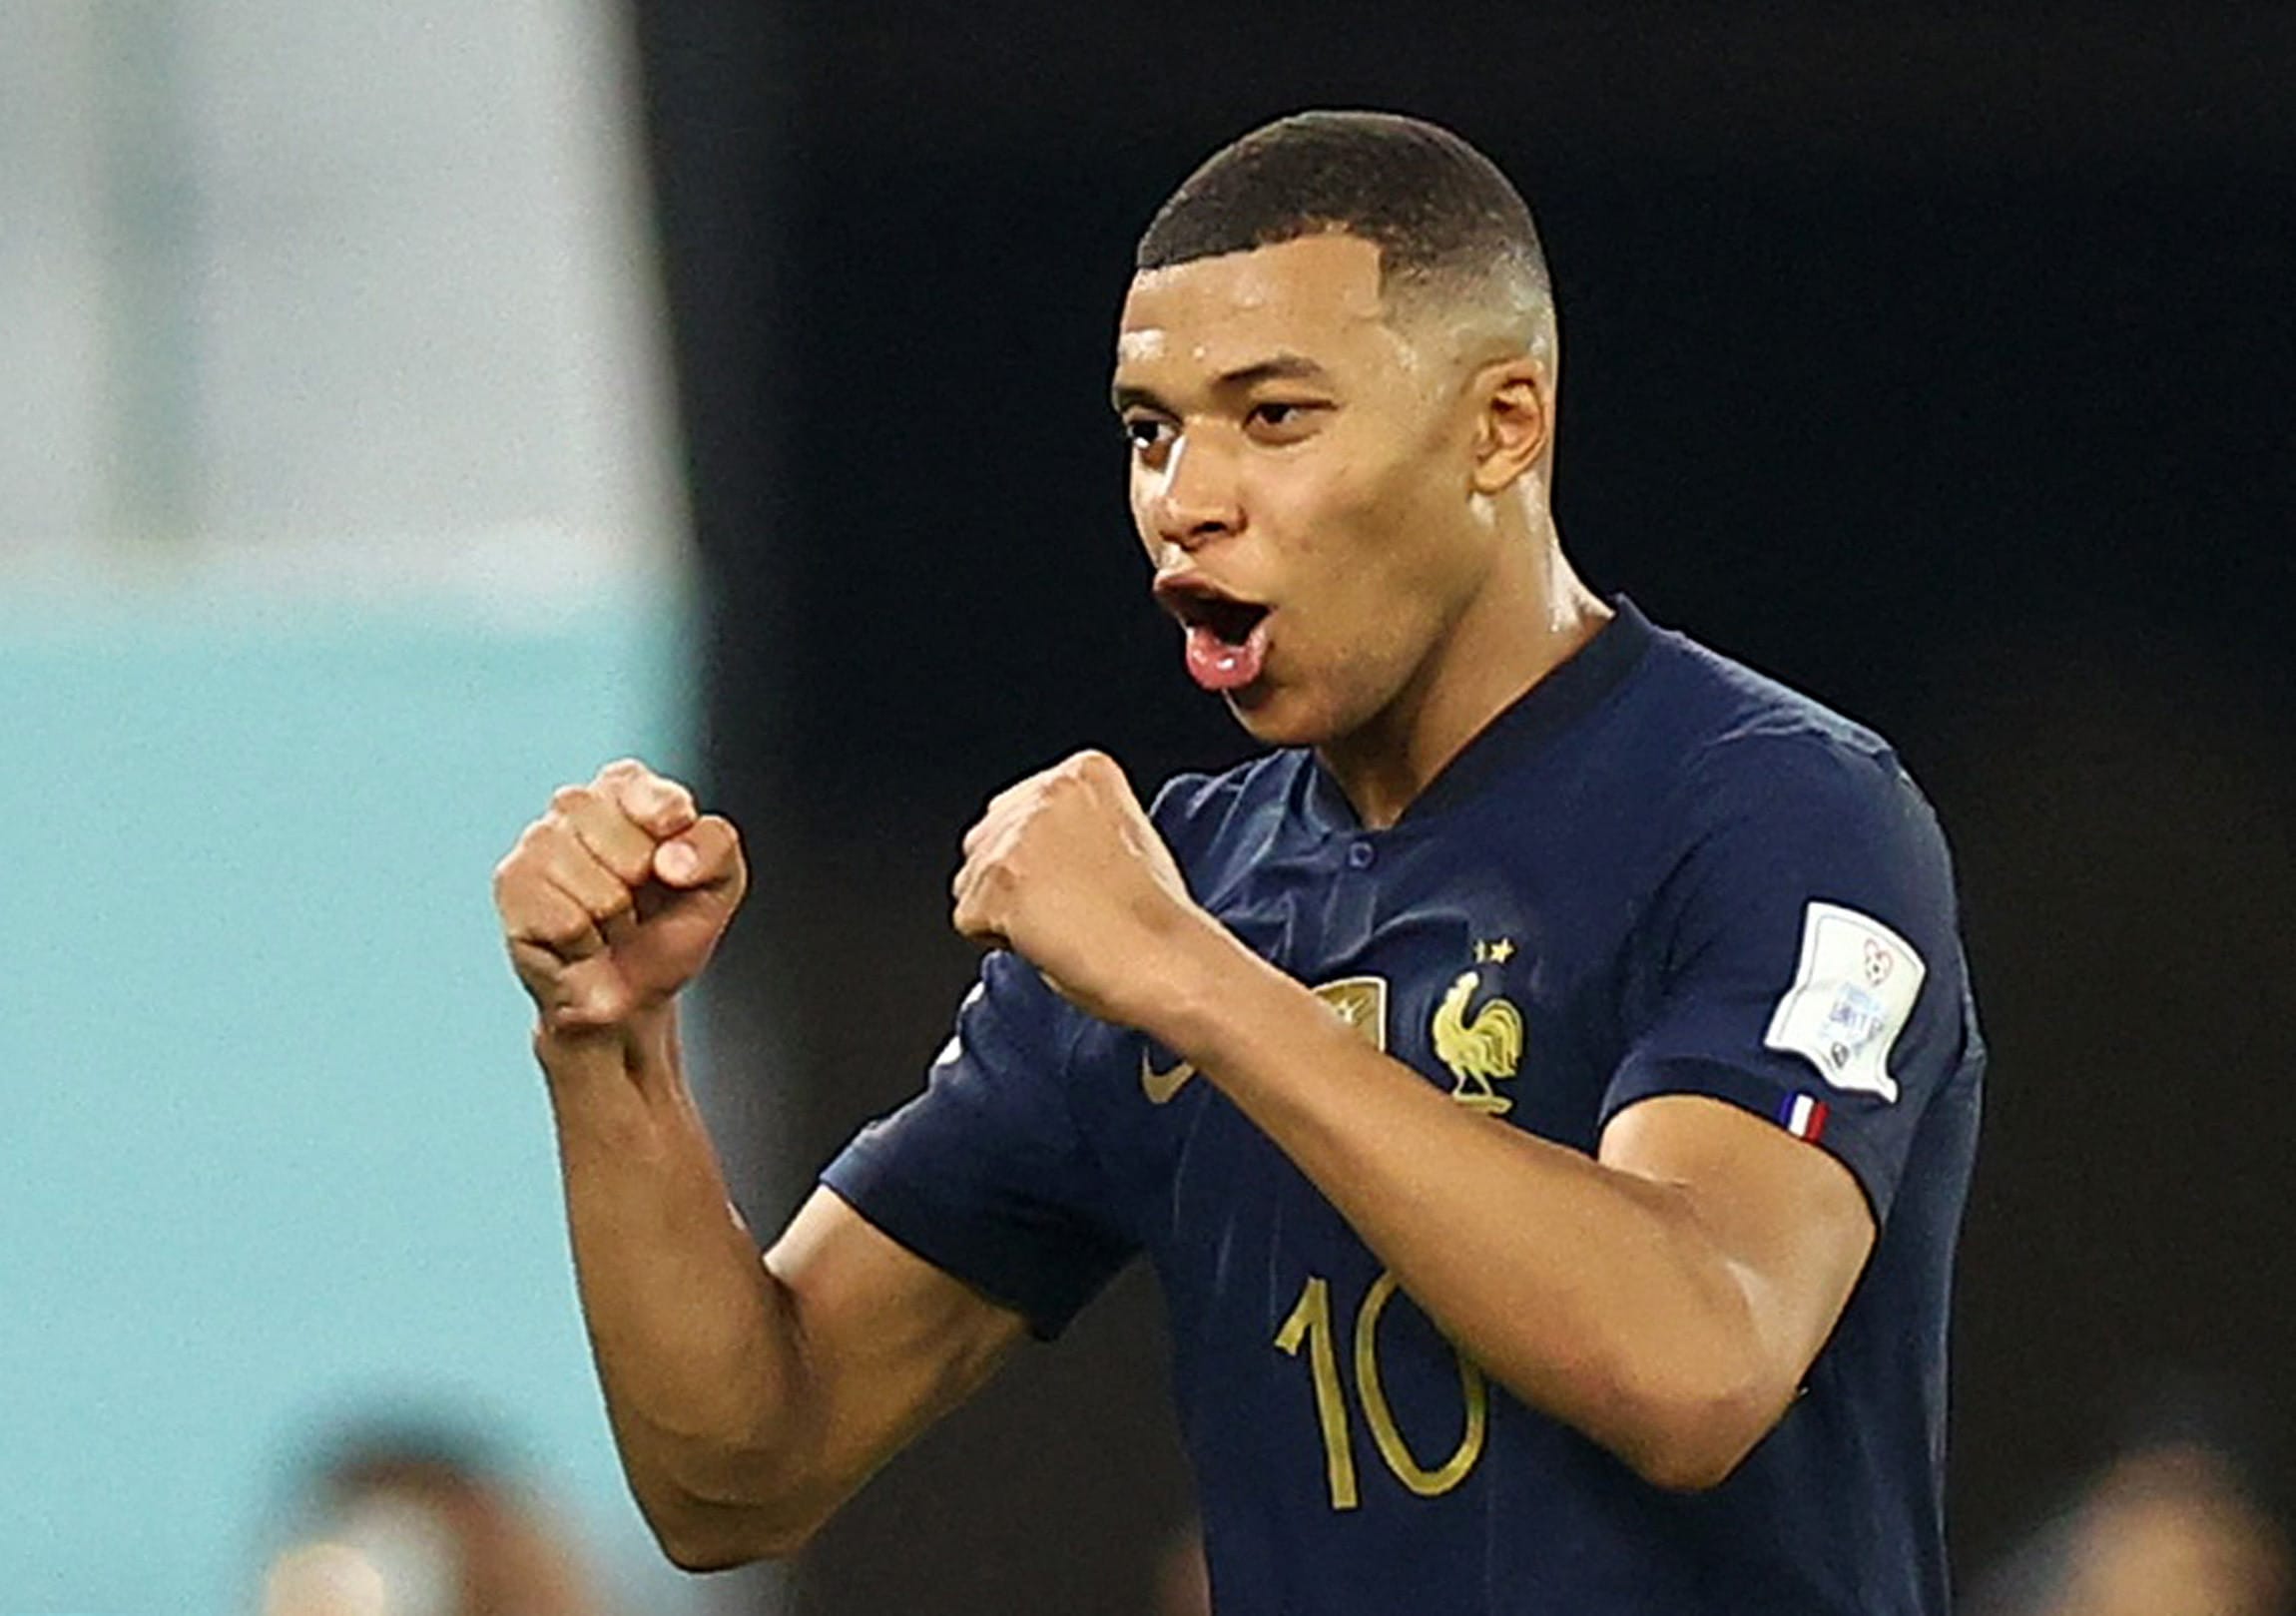 Player of the French national team, Kylian Mbappe